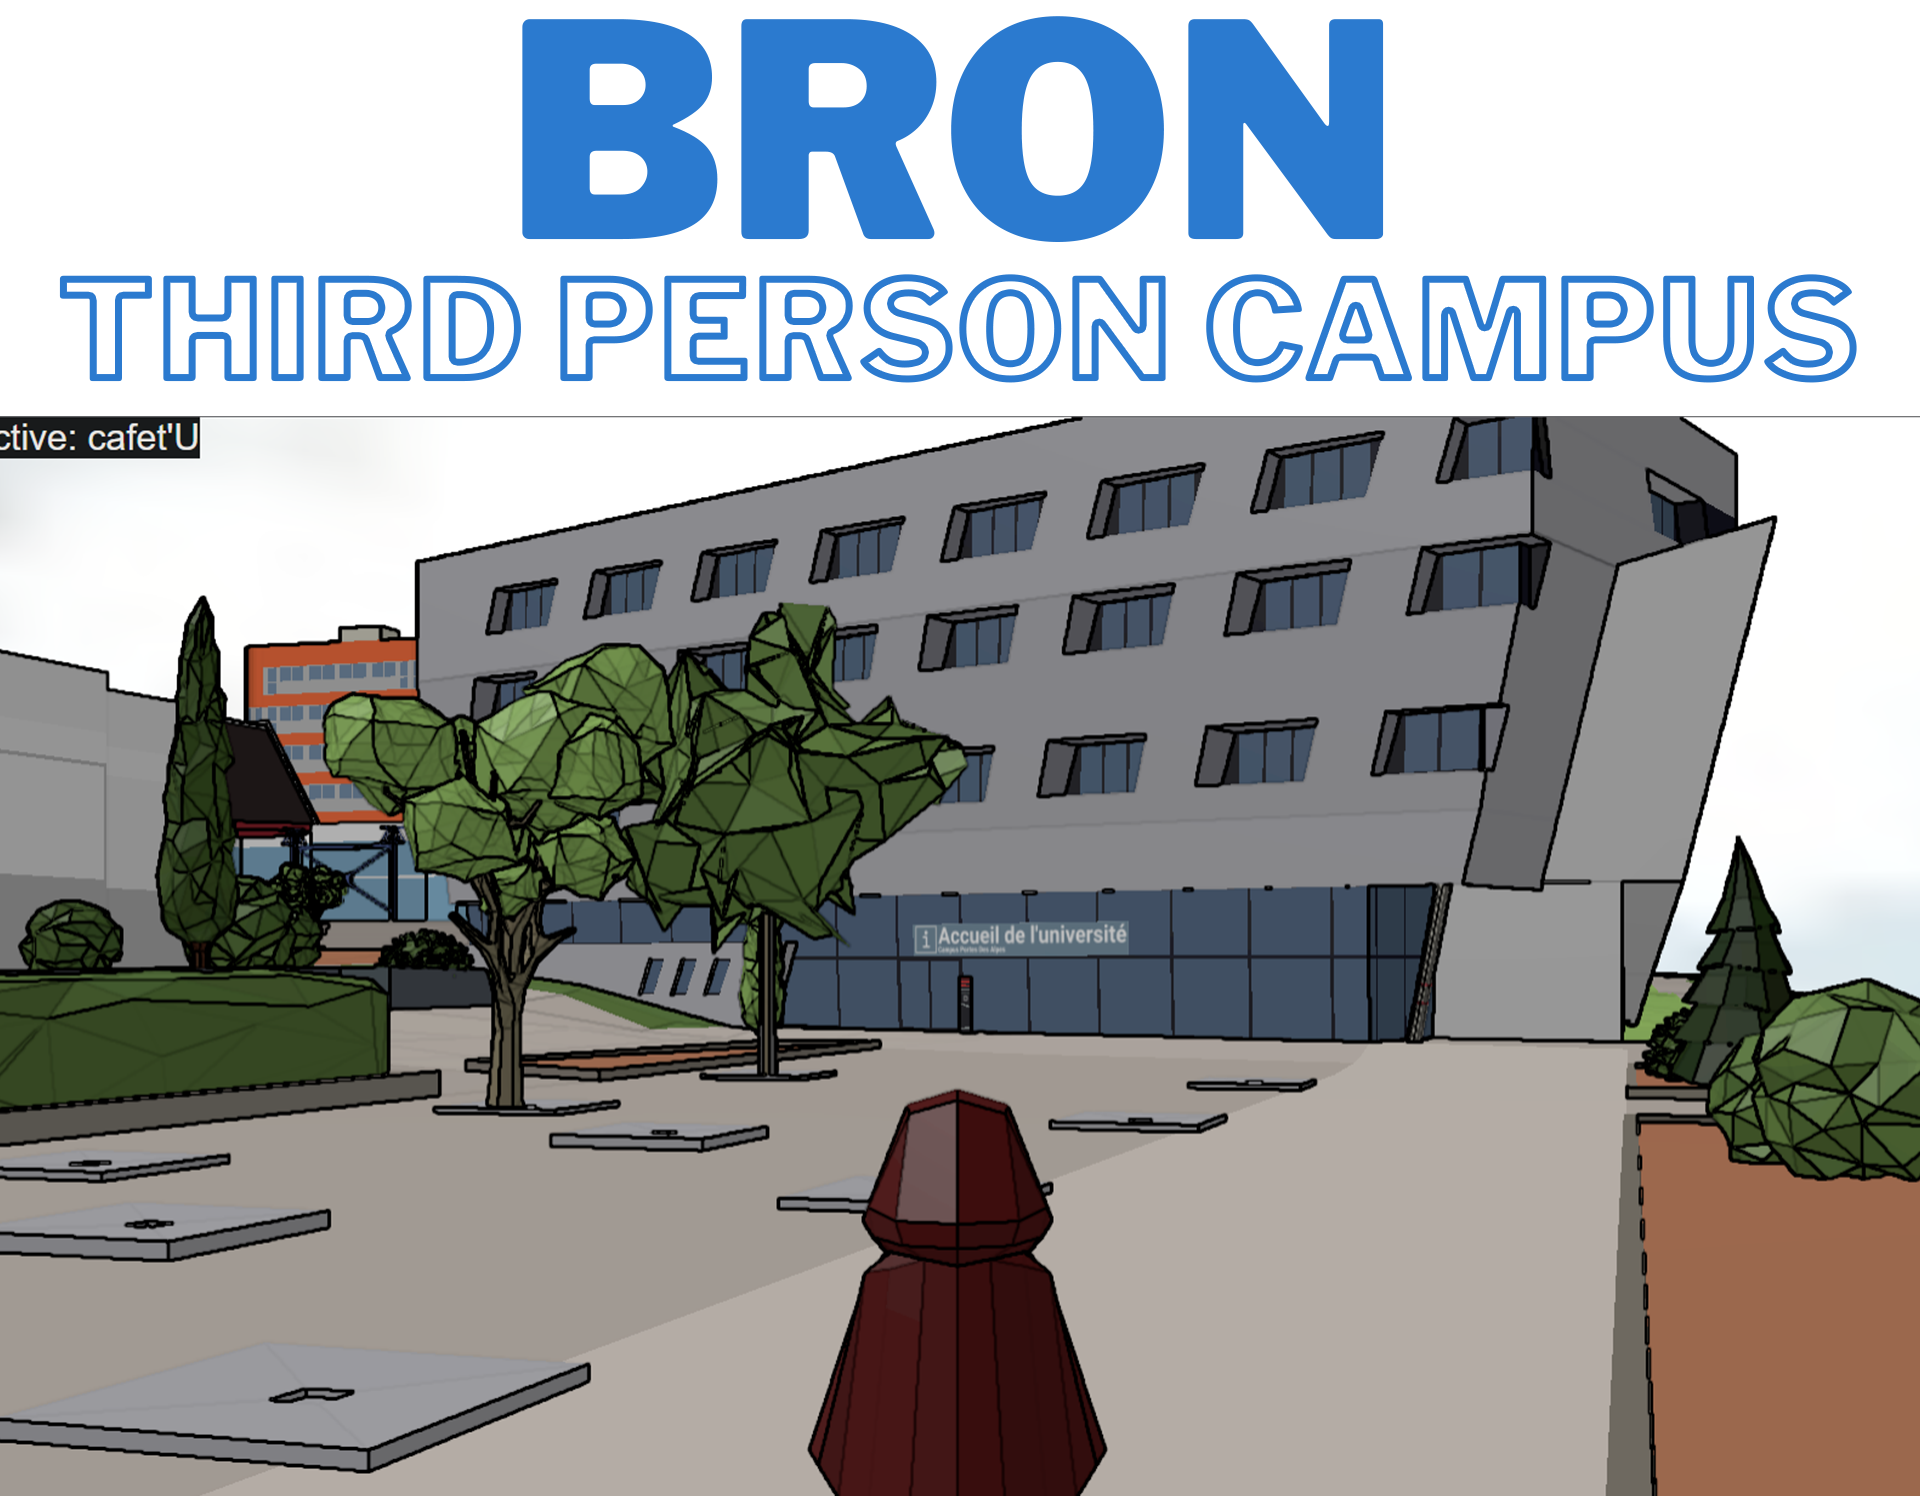 Third person campus wandering